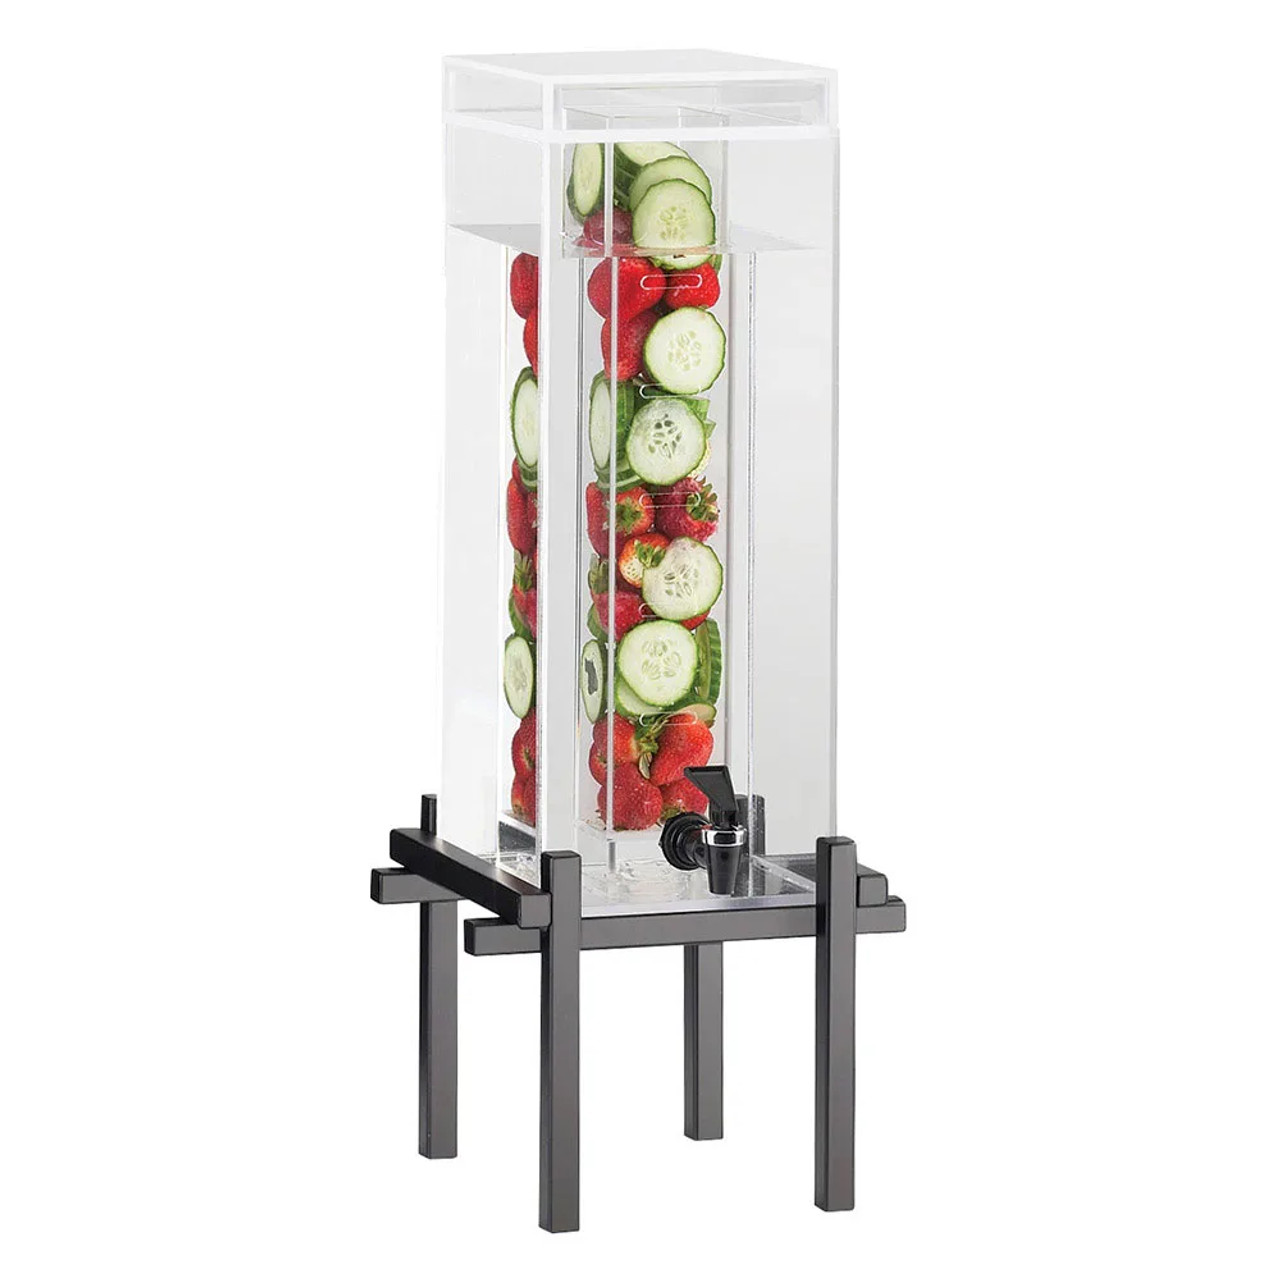 Cal-Mil 1 1/2 gal Beverage Dispenser w/ Infuser Clear Acrylic & Black Metal Base - Chicken Pieces